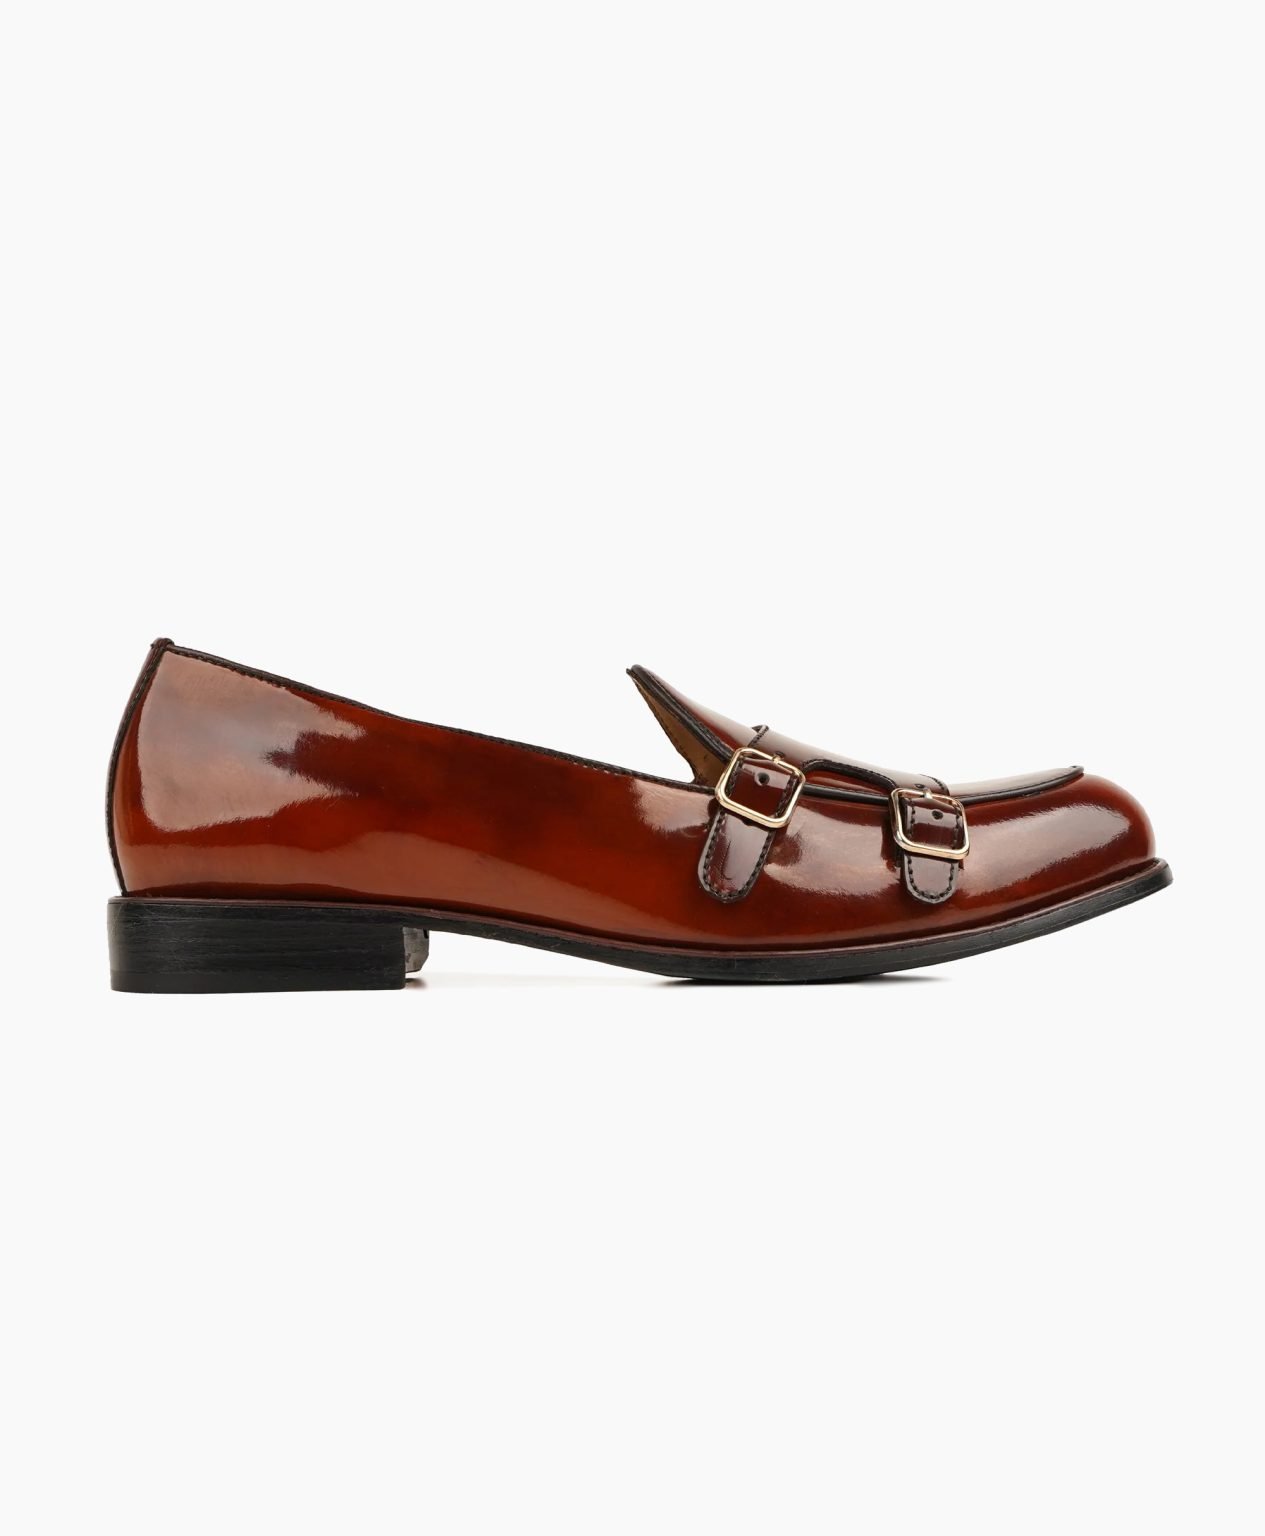 dartmouth-double-monkstrap-brown-leather-shoes-image201